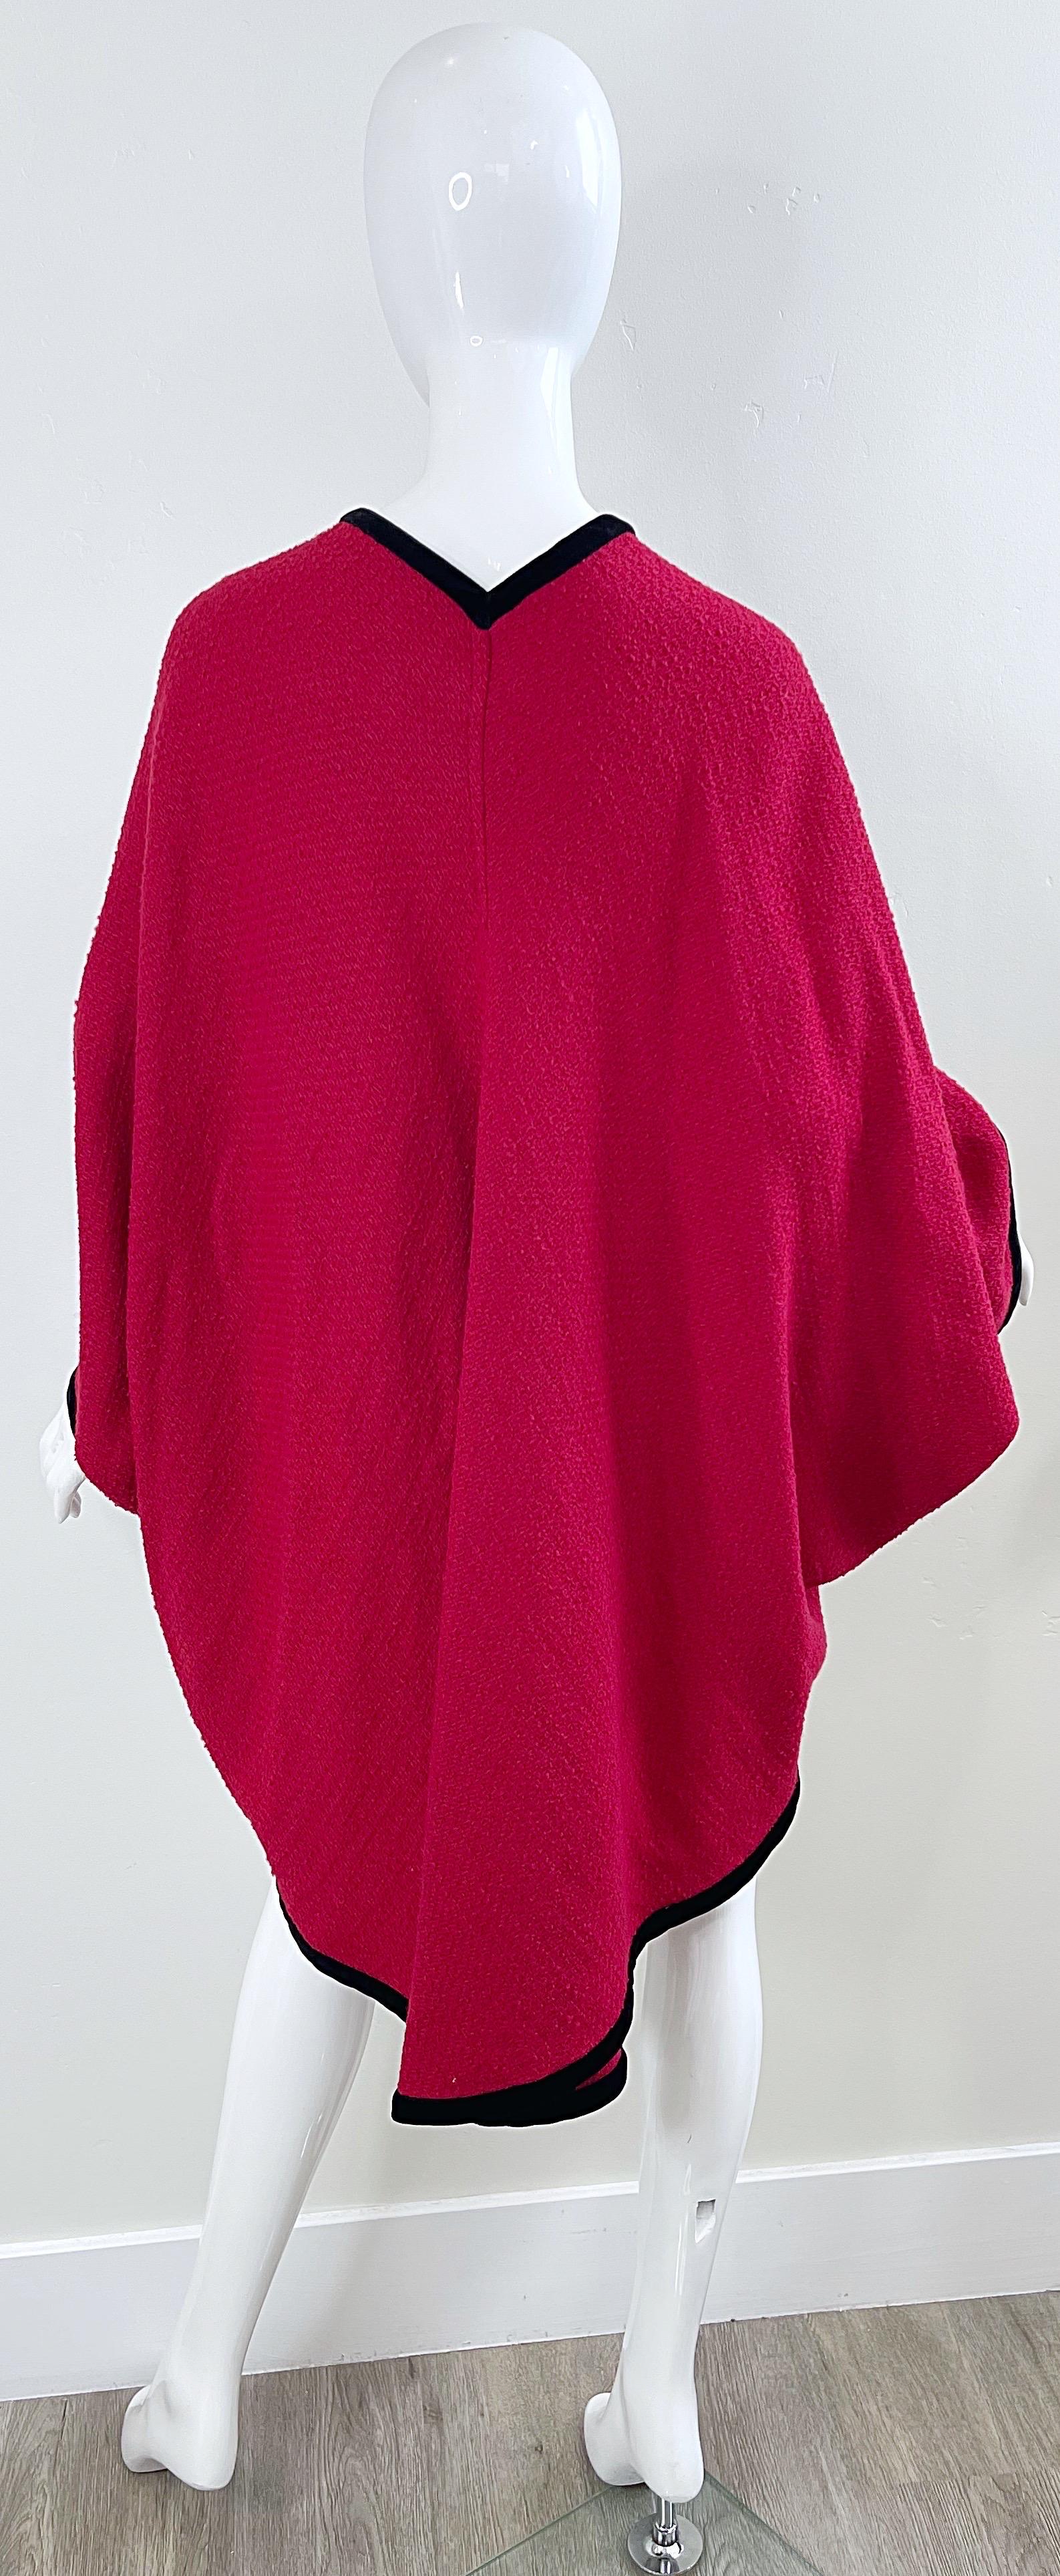 Women's Karl Lagerfeld 1980s Lipstick Red Boiled Wool Cocoon Vintage Cape Kimono Jacket For Sale